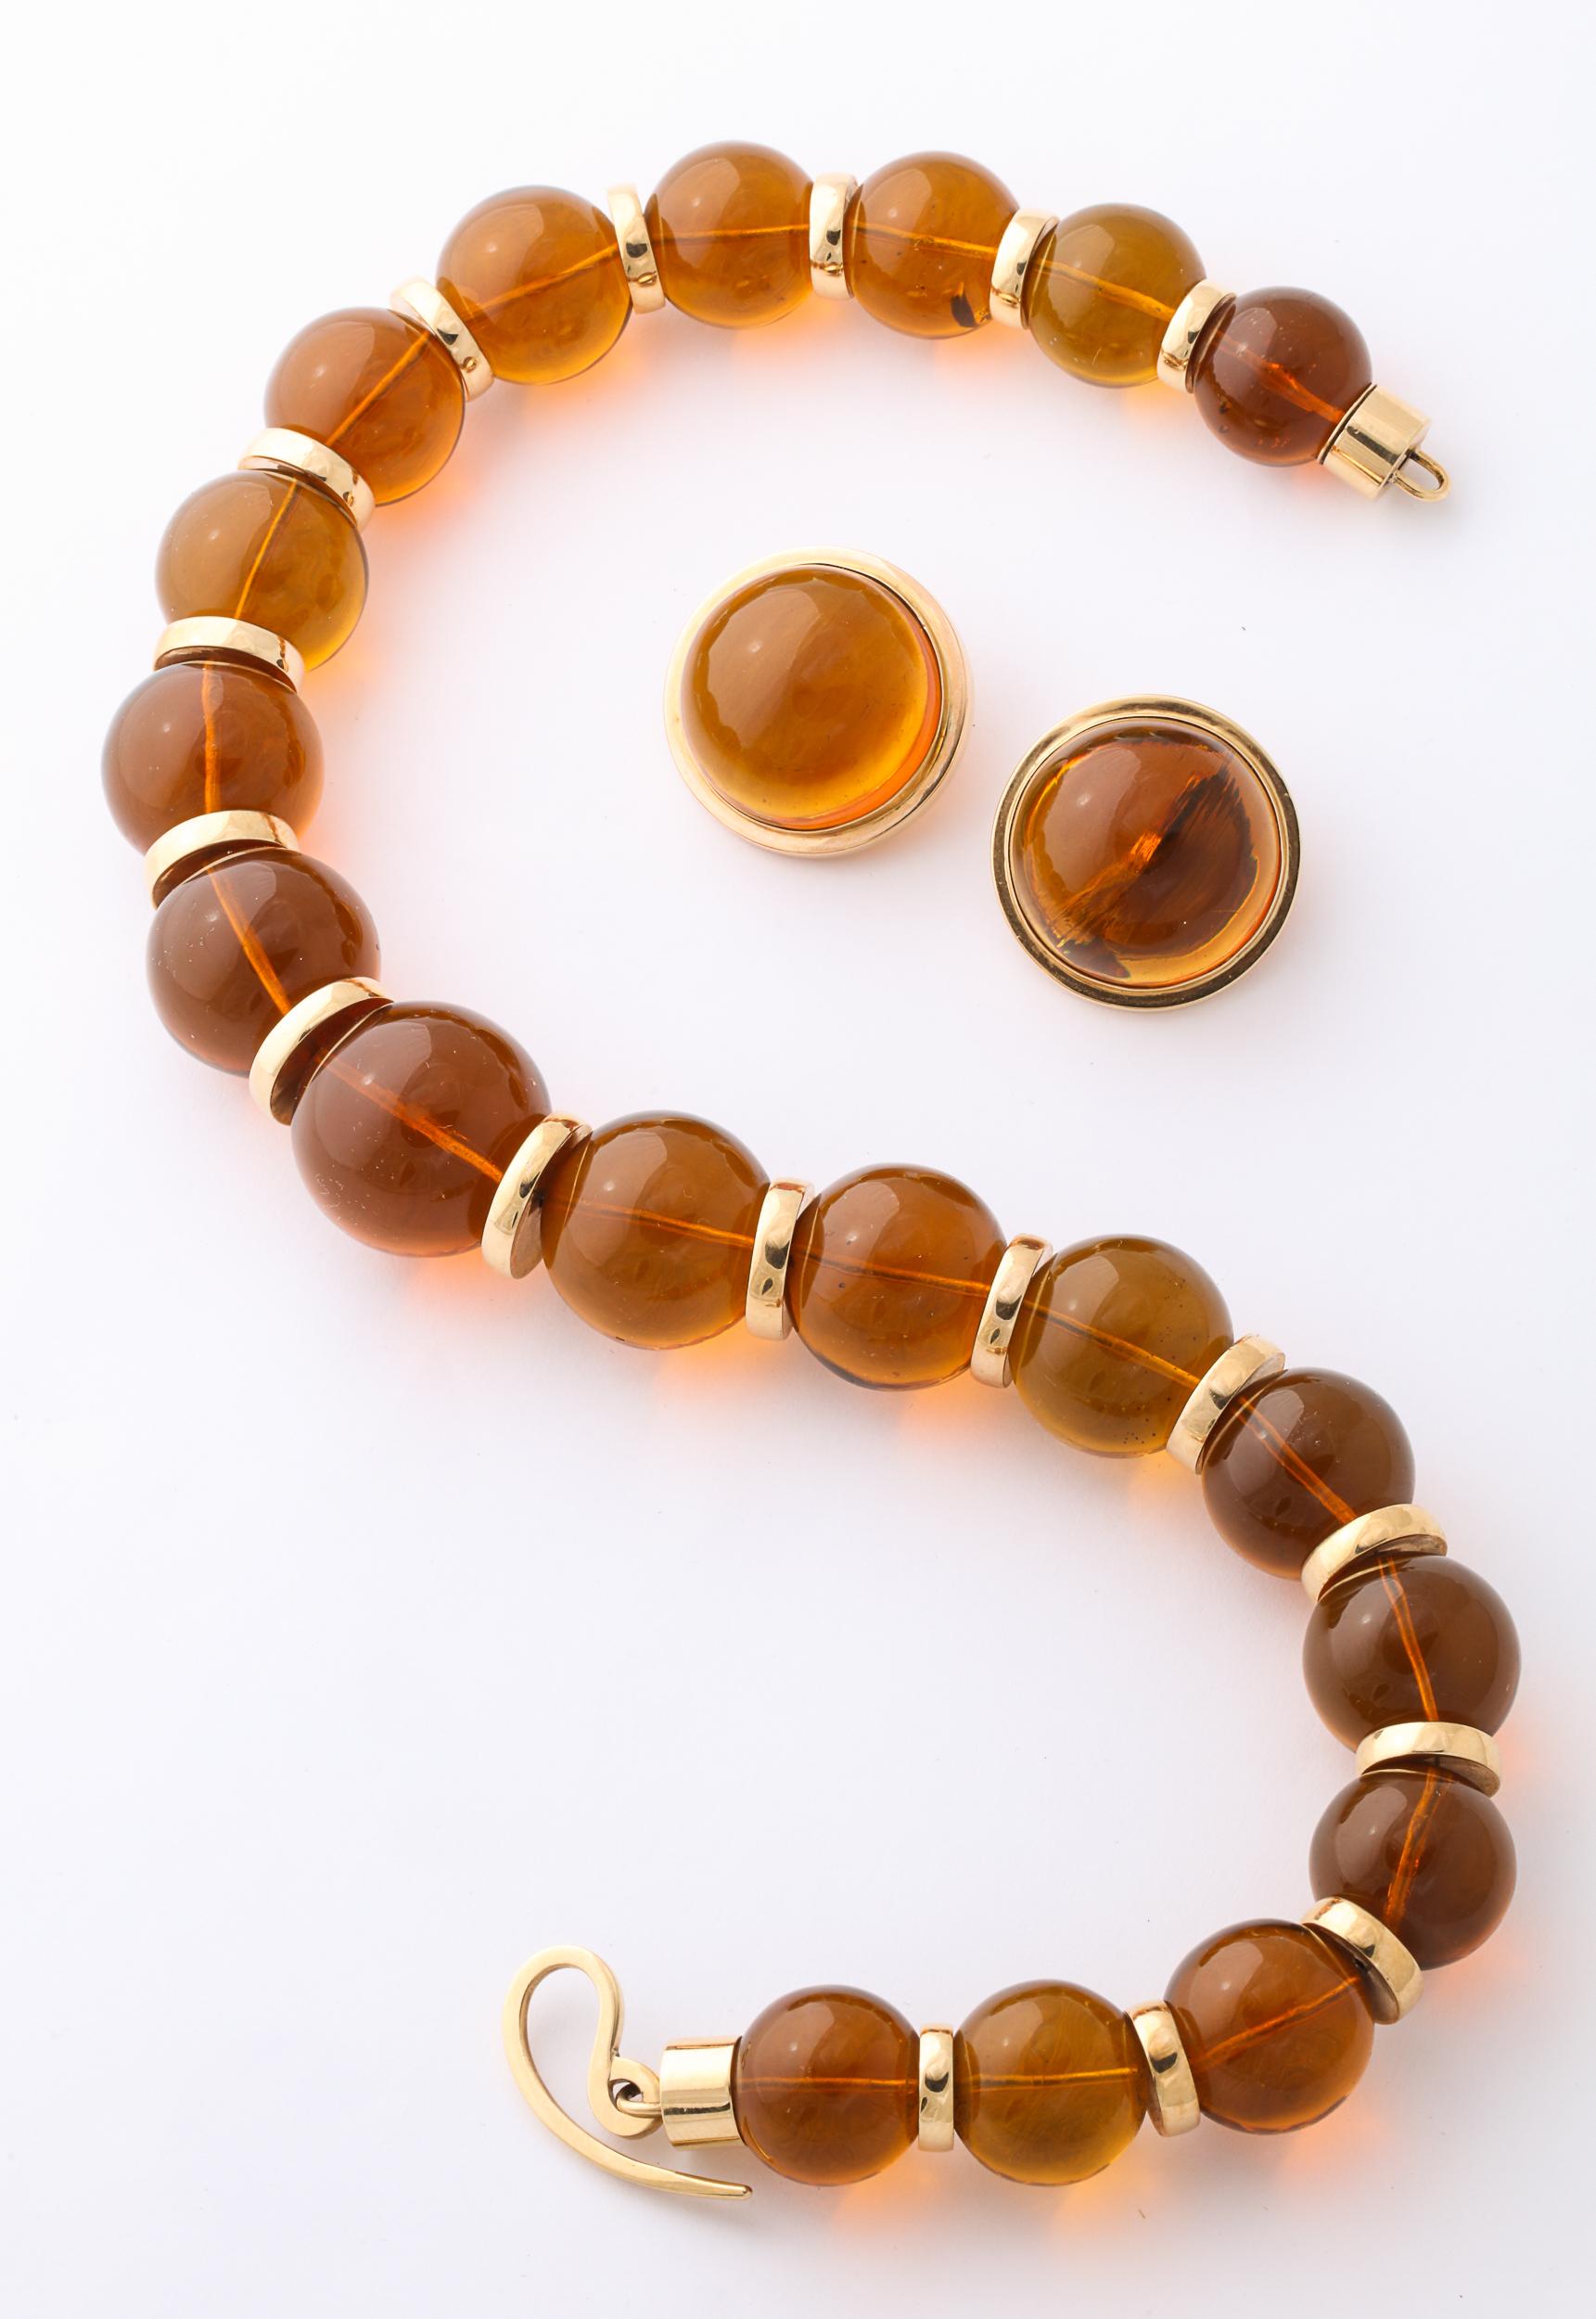 Reconstituted Polished Amber Beads Set in Bezel Setting For Sale 3